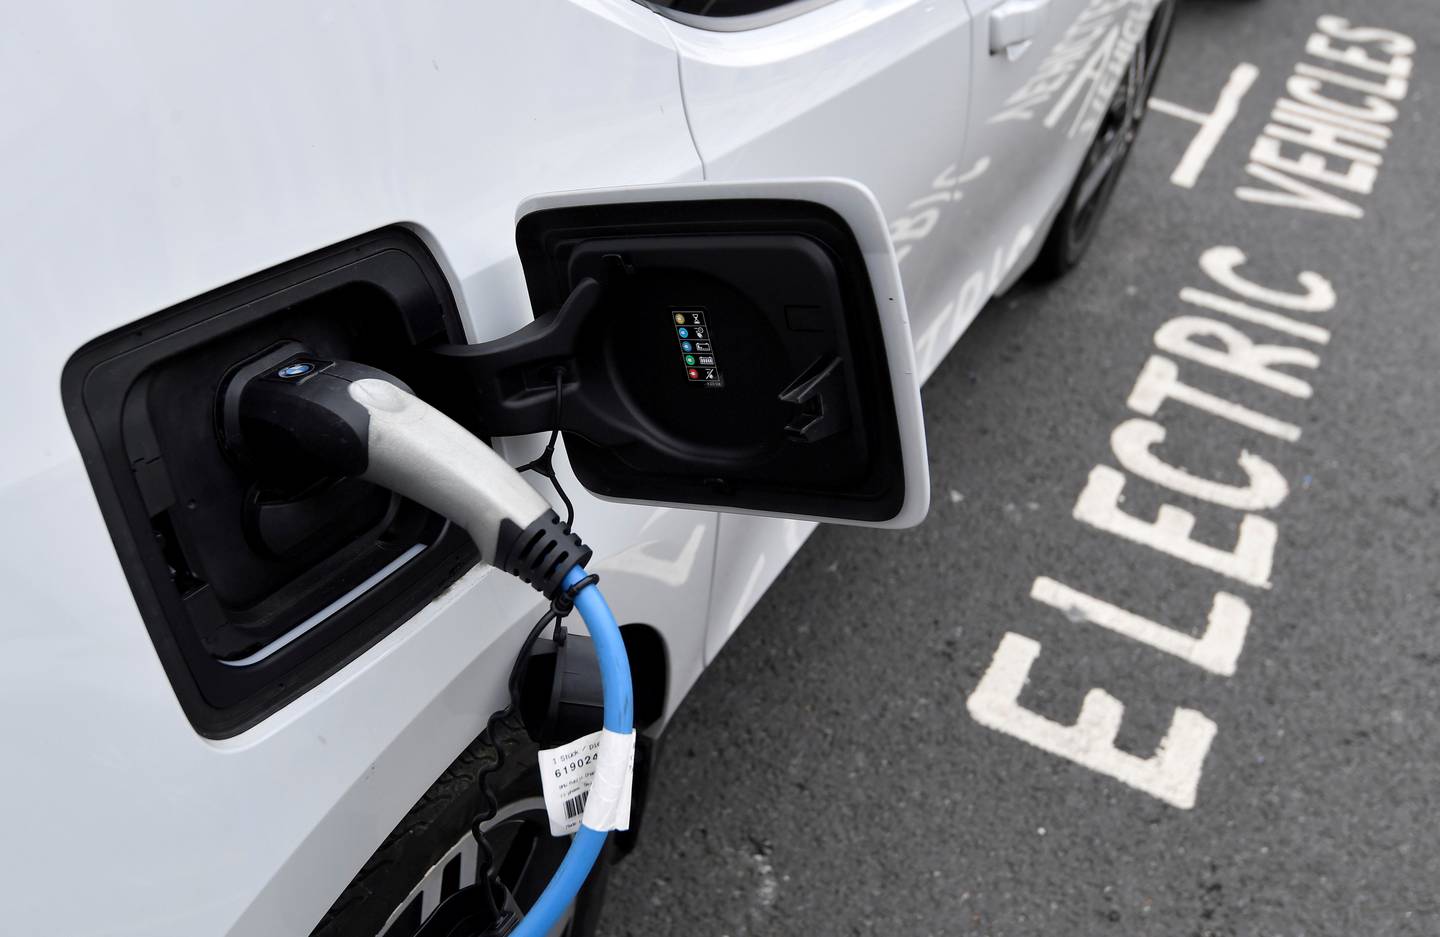 An electric car is charged at a roadside EV charge point in London. Photo: Reuters